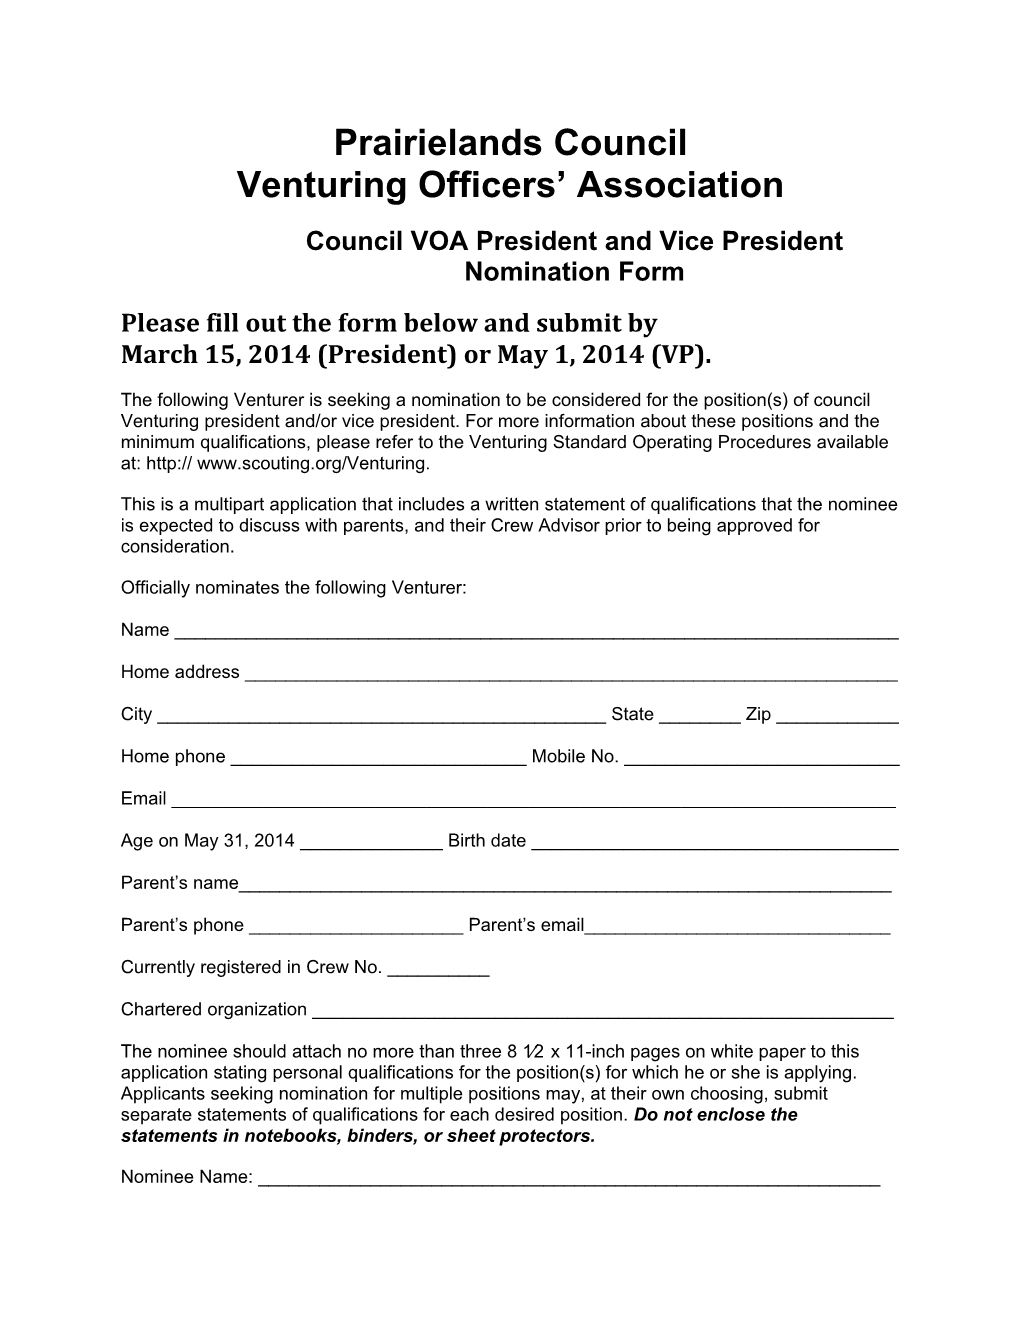 Council VOA President and Vice President Nomination Form